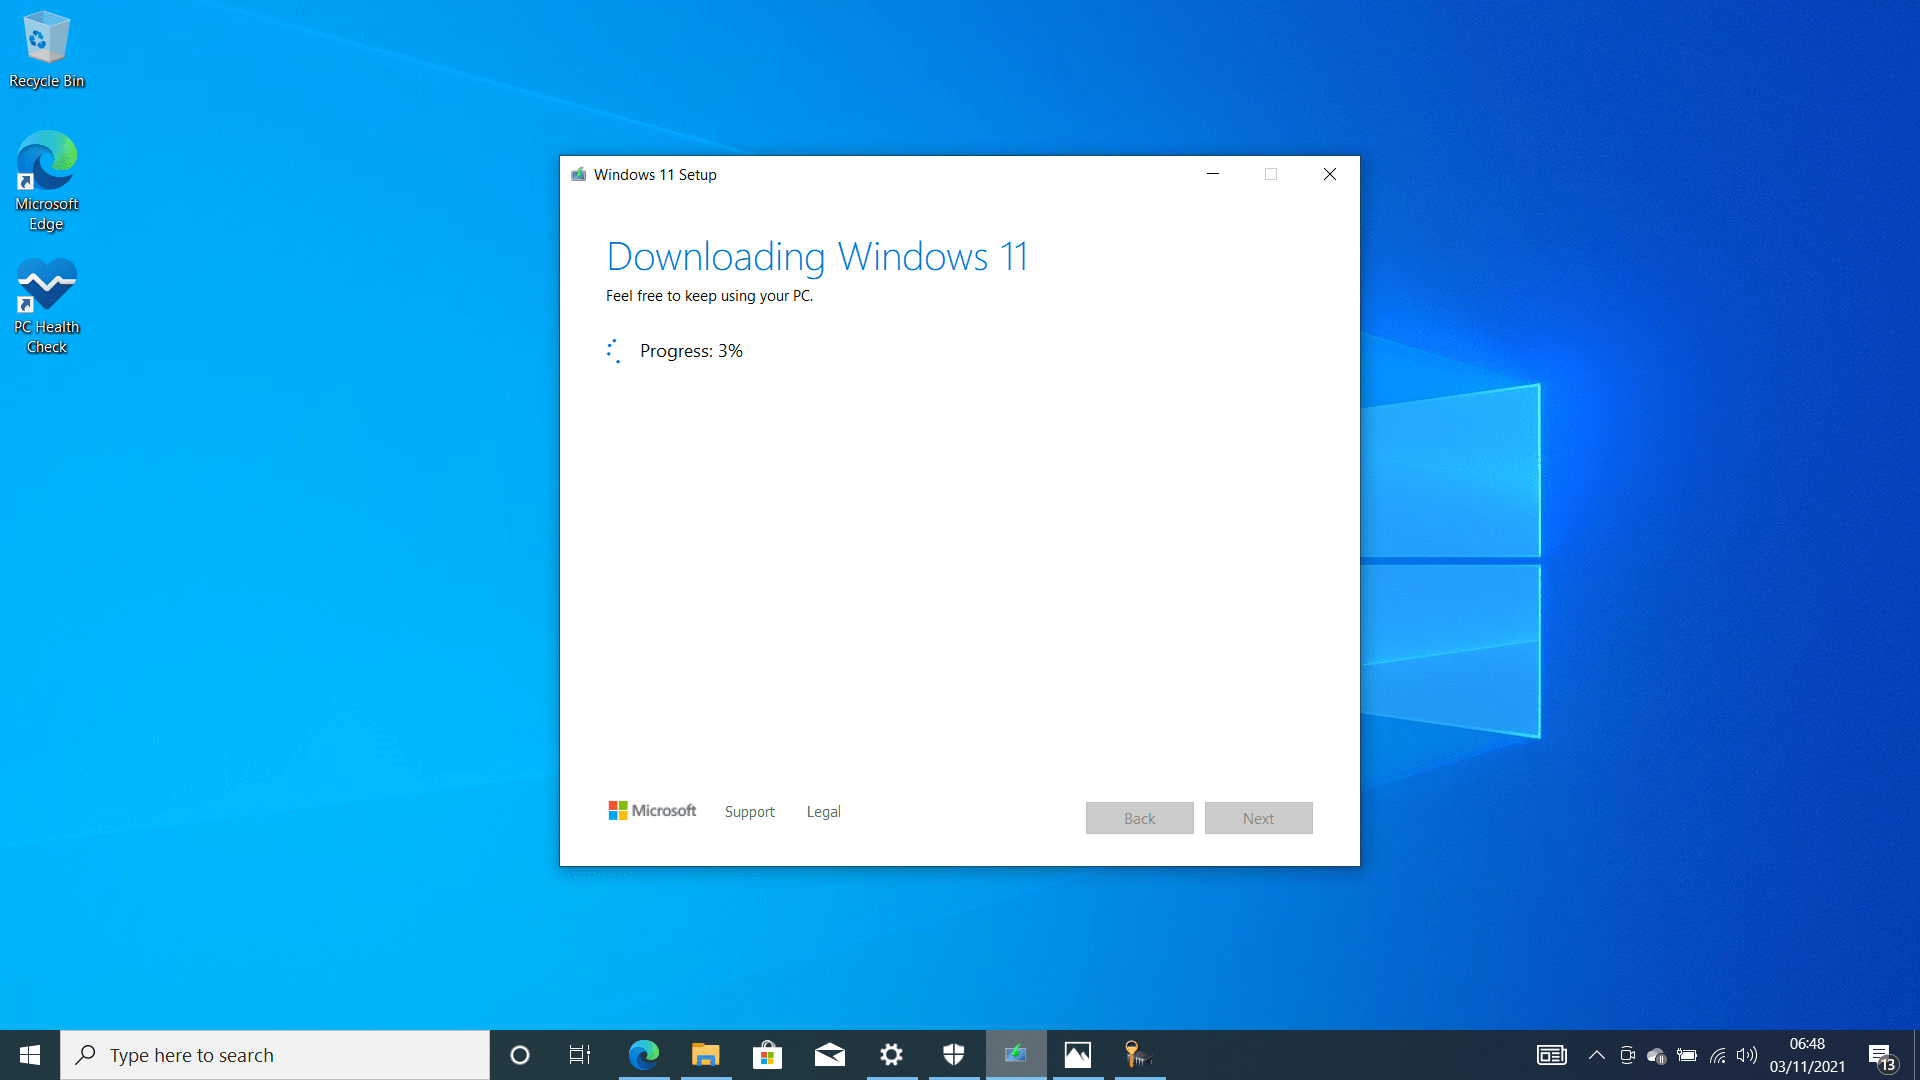 Downloading Windows 11 Page